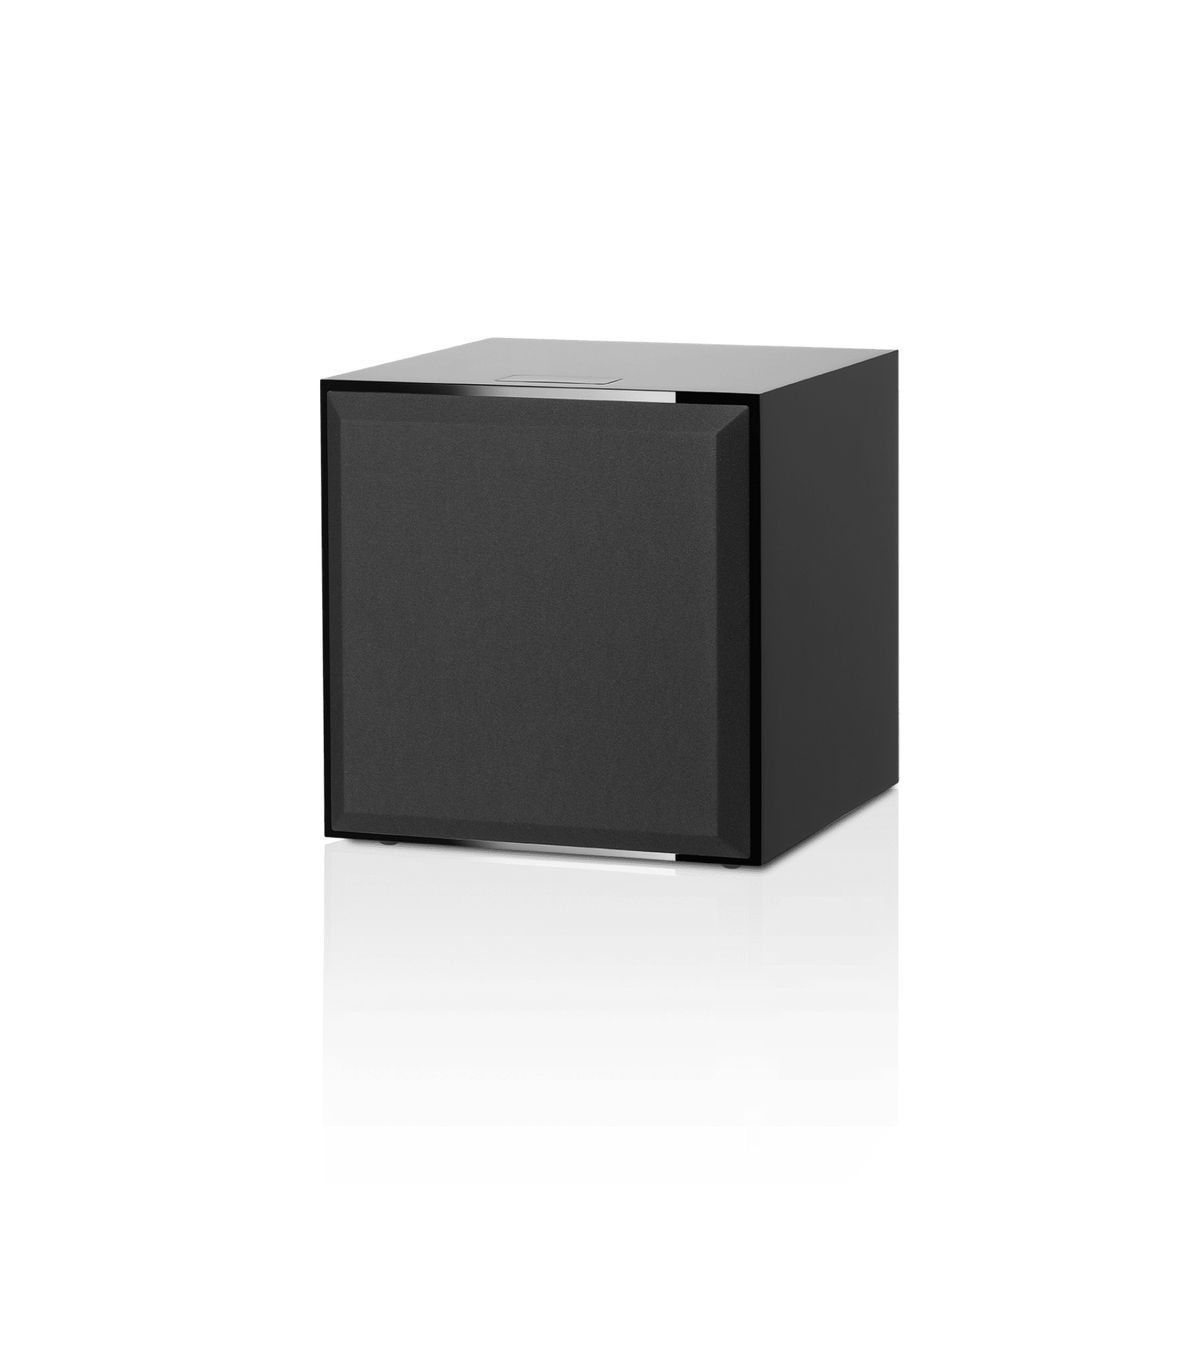 Bowers &amp; Wilkins DB4S Subwoofer